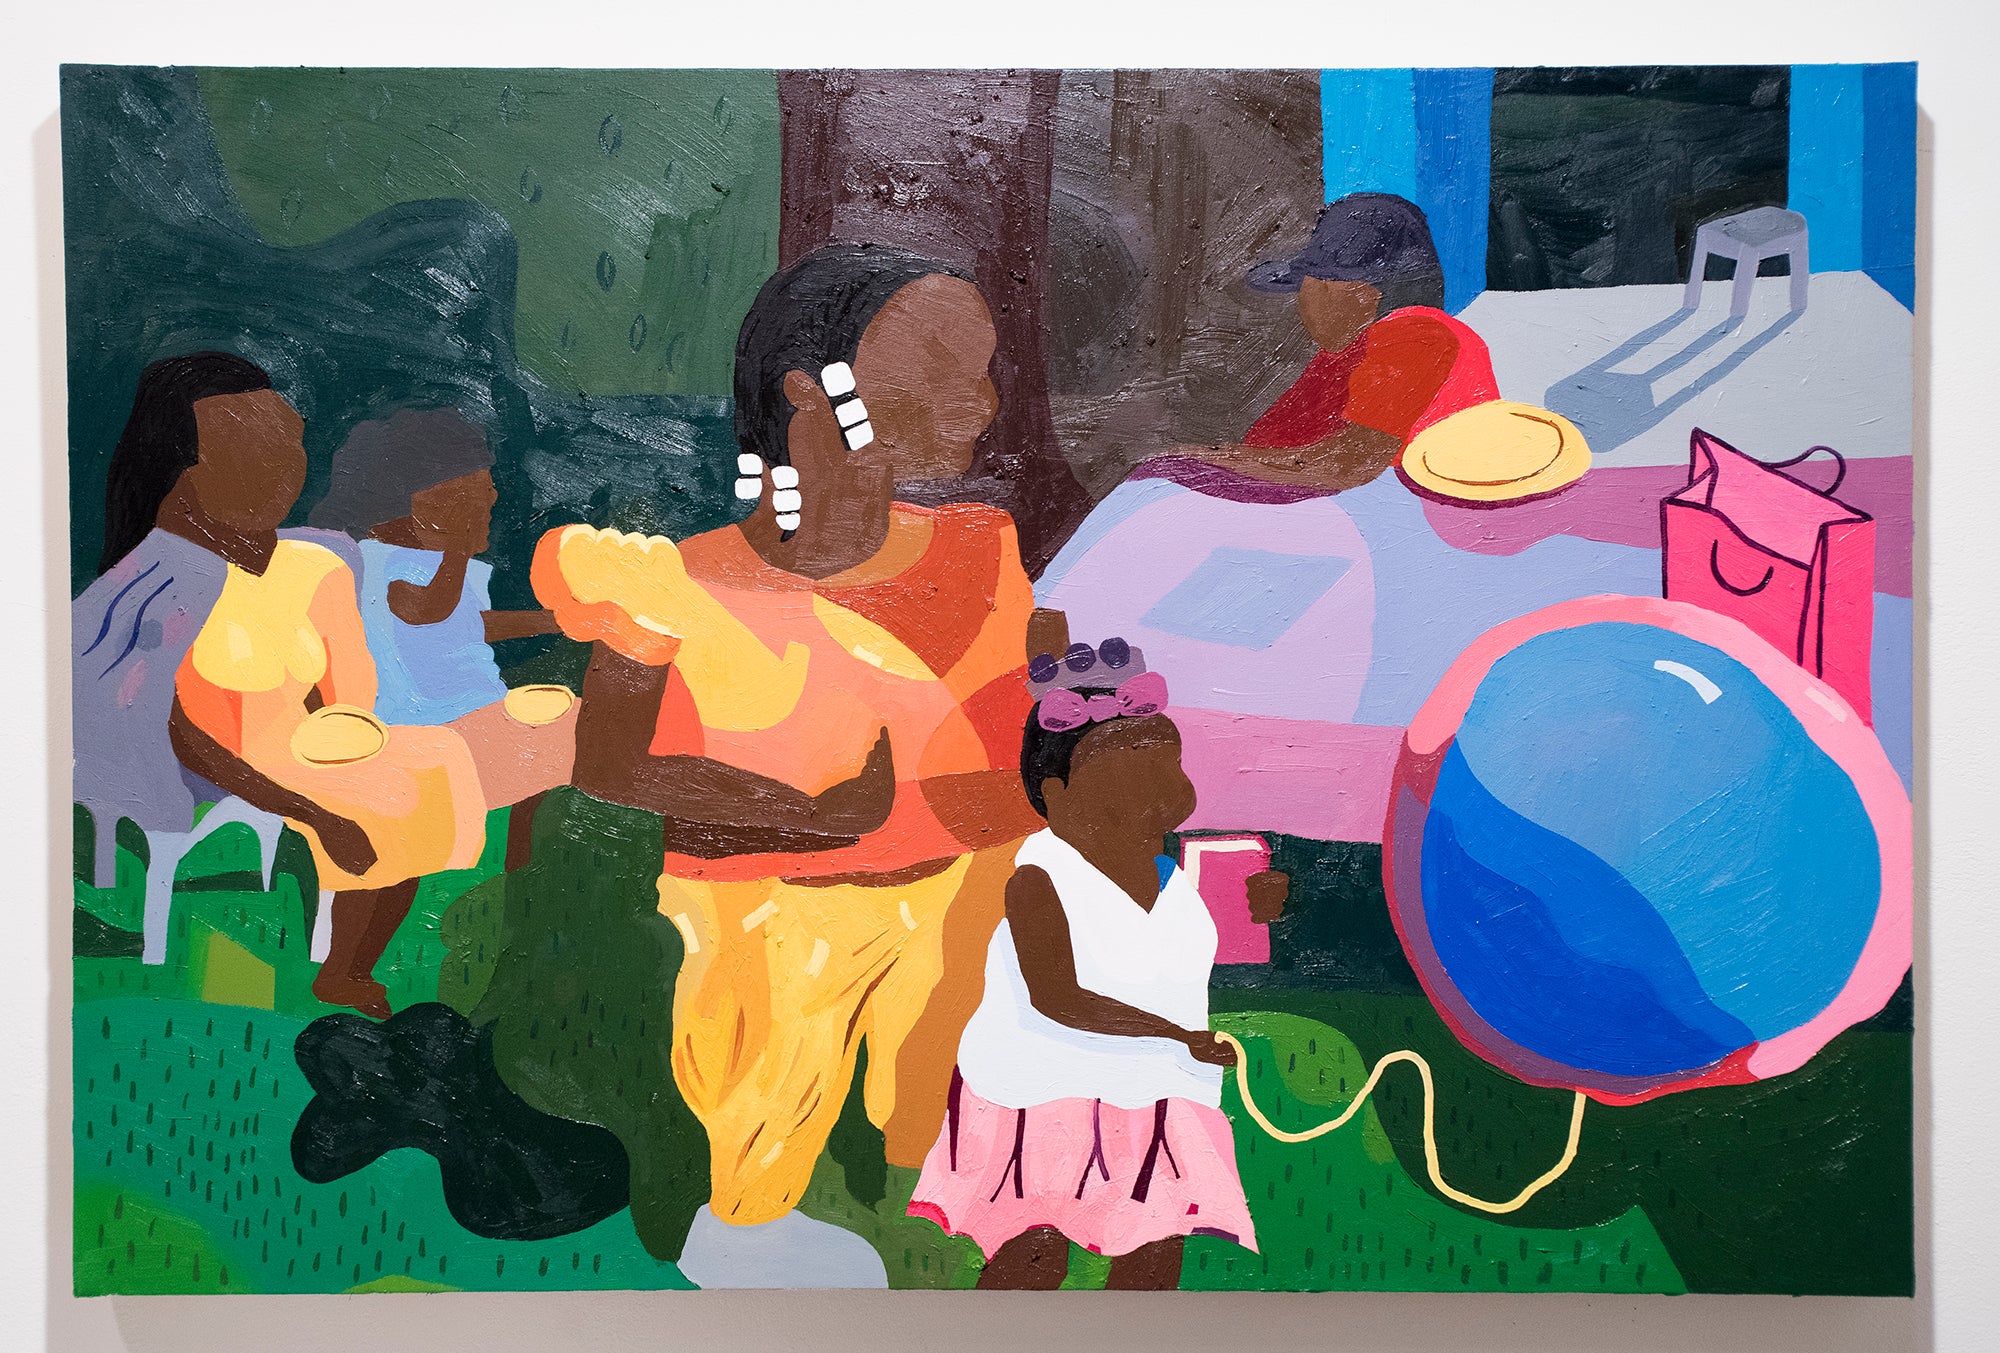 Azikiwe Mohammed, "Imani's Cookout" SOLD